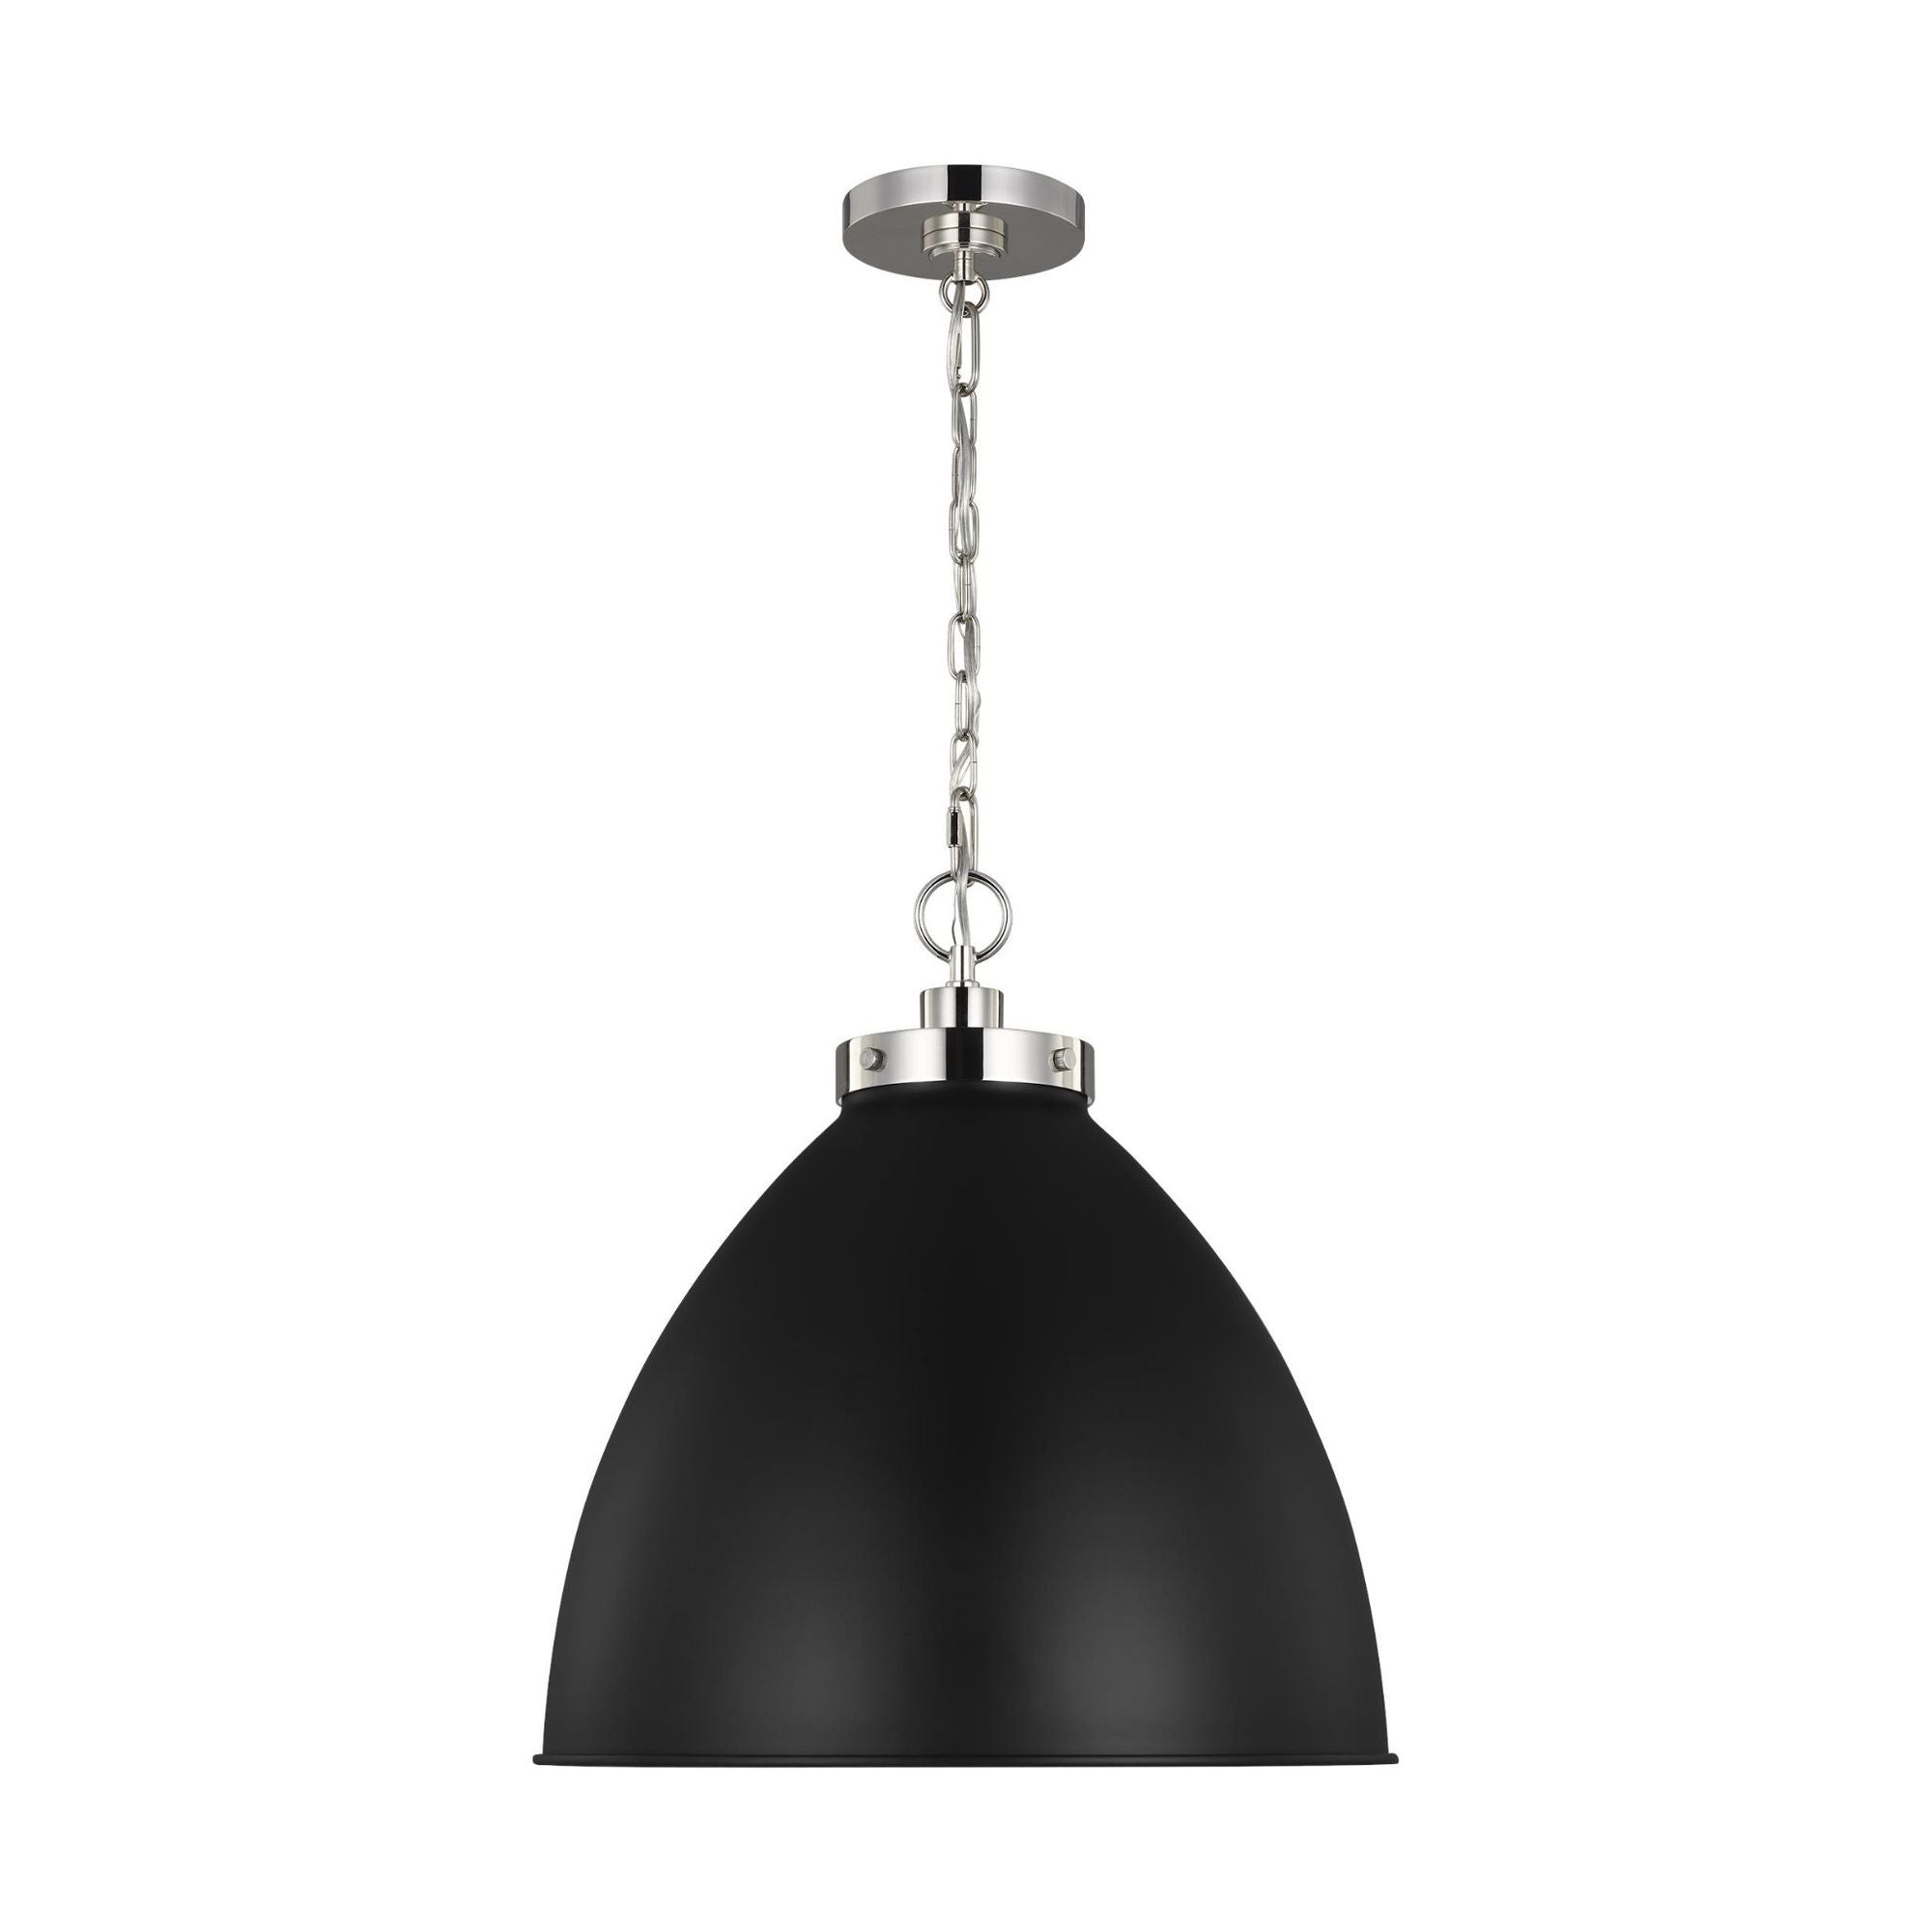 Chapman & Myers Wellfleet Large Dome Pendant in Midnight Black and Polished Nickel